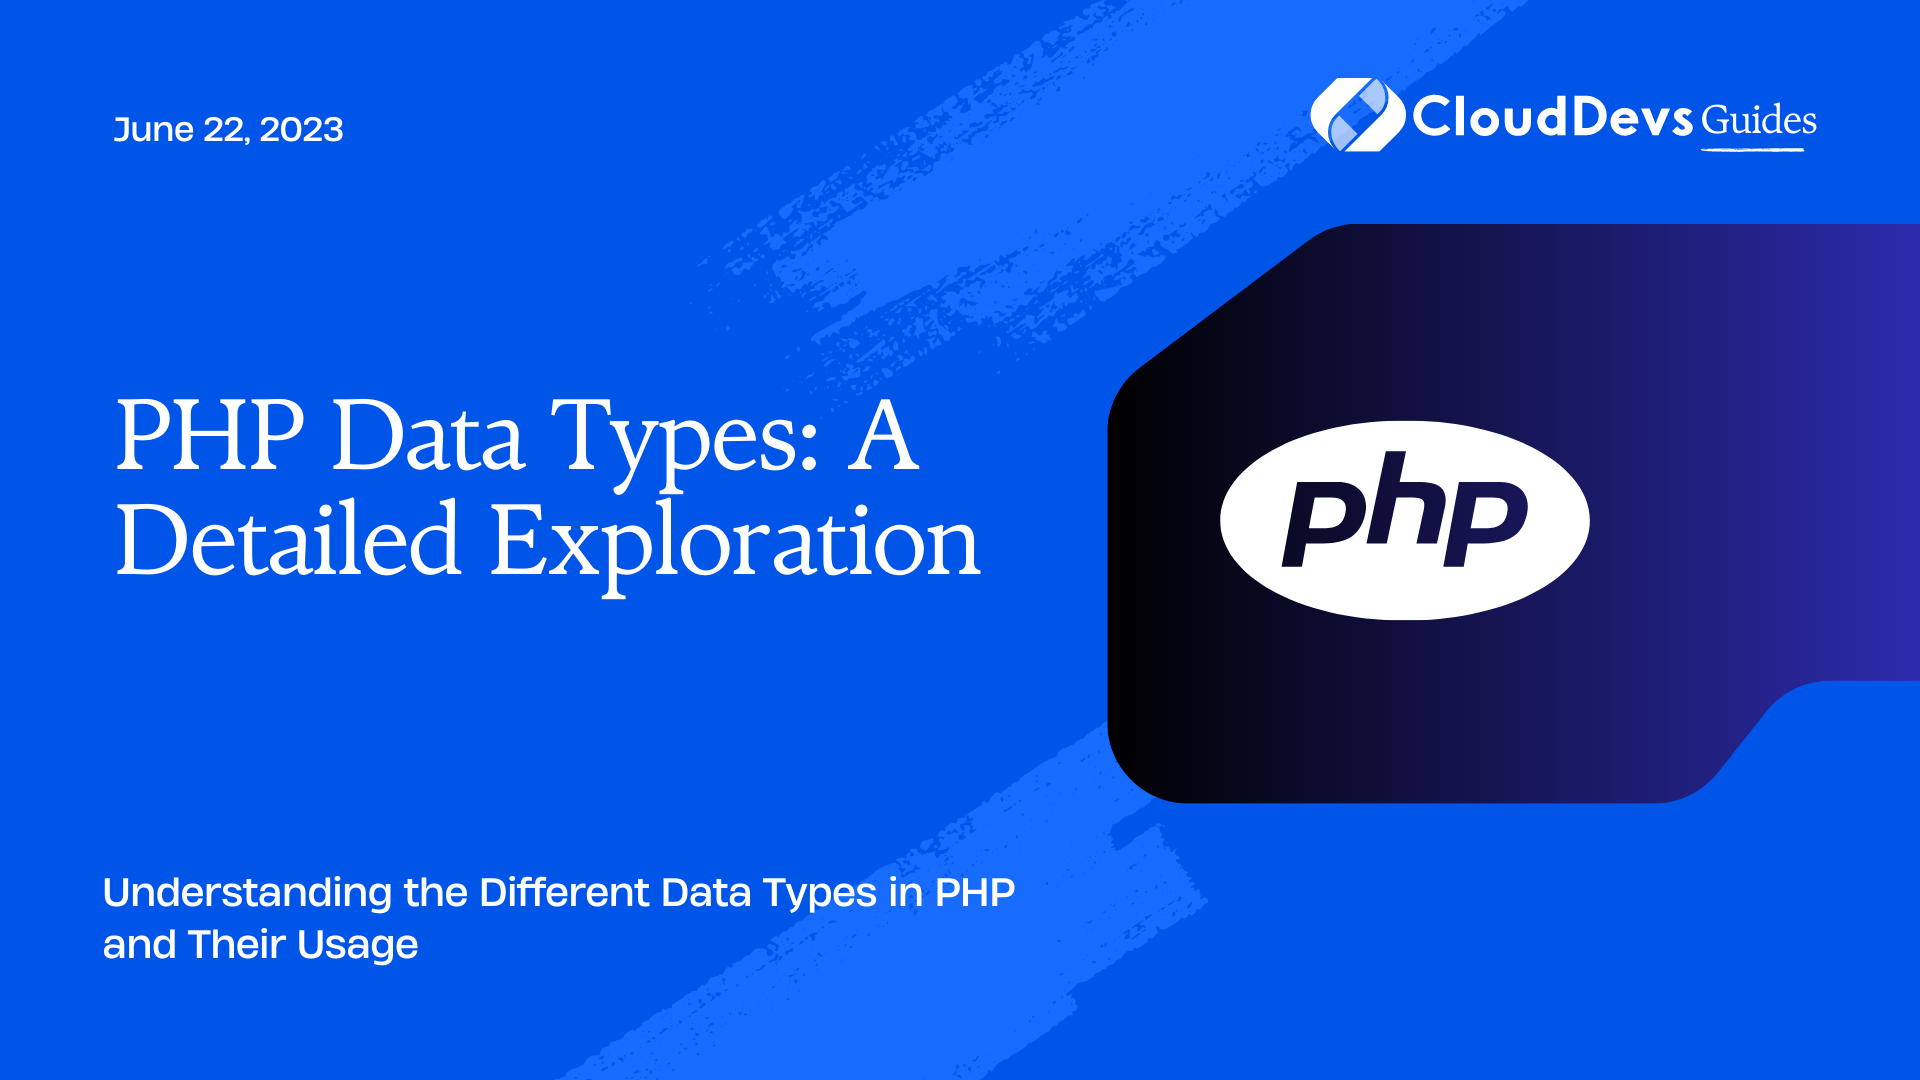 PHP Data Types: A Detailed Exploration